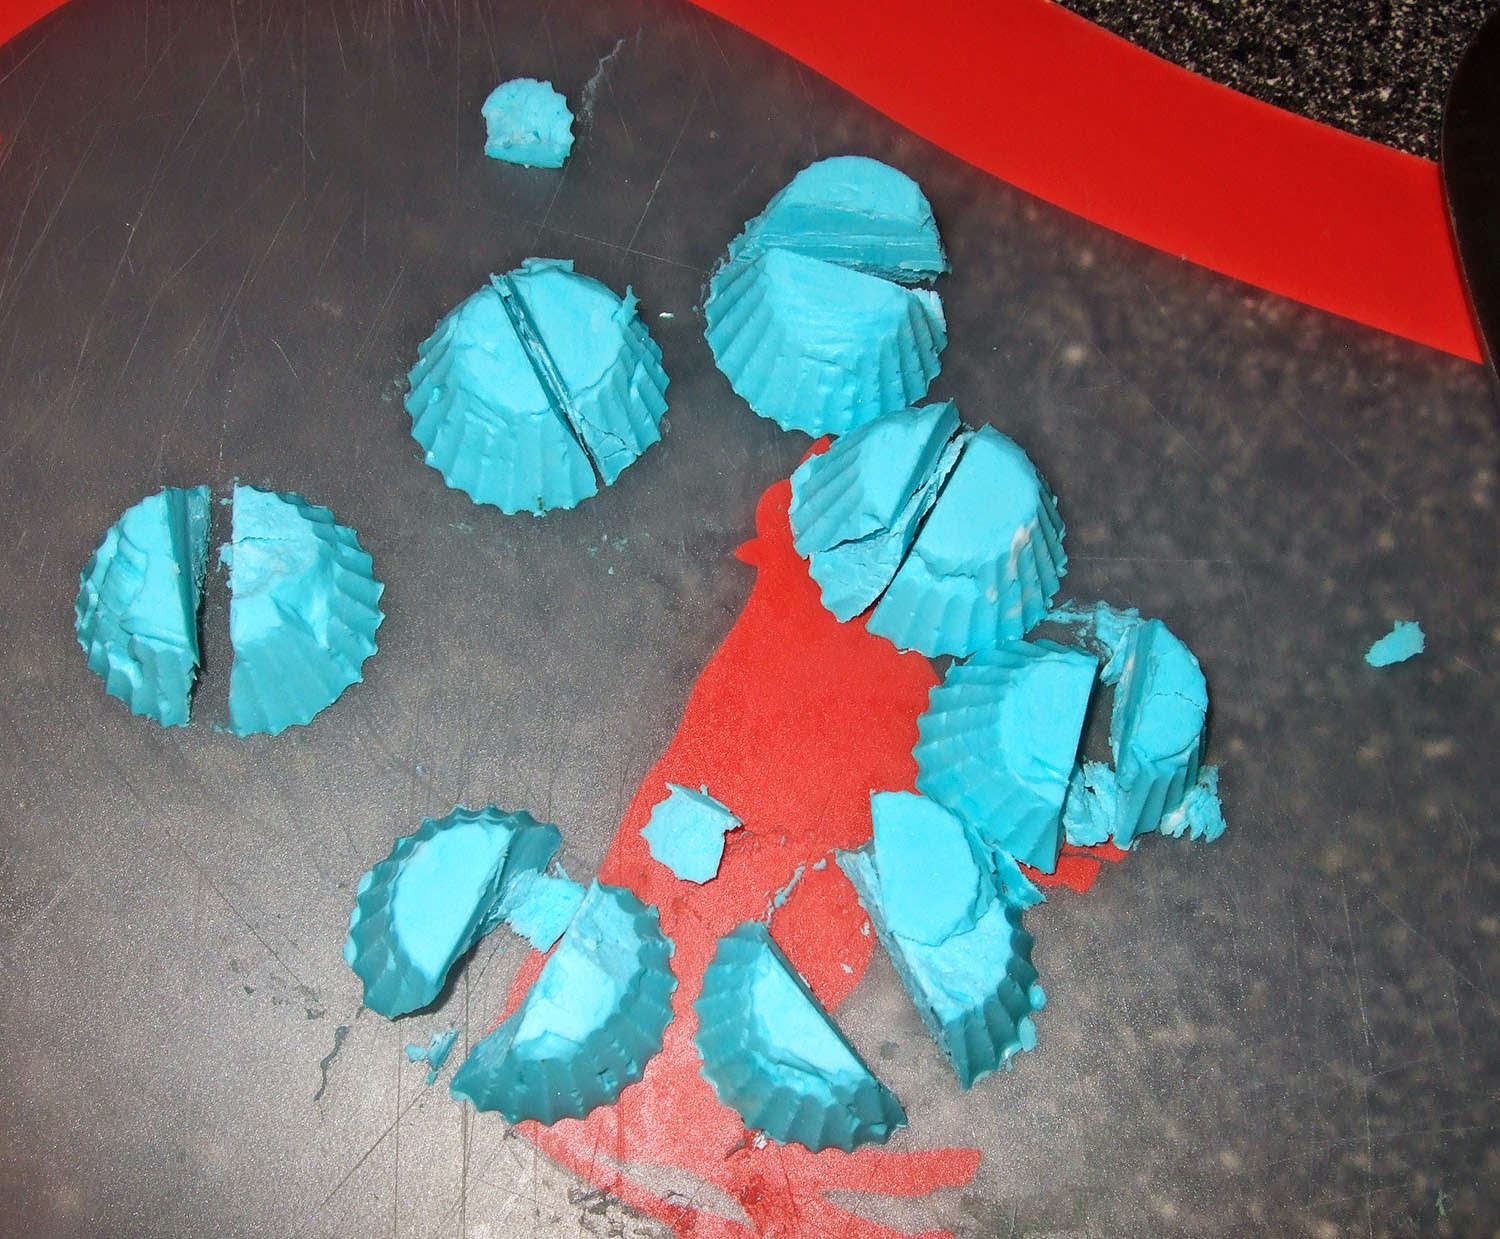 Cut up blue frosting bombs.